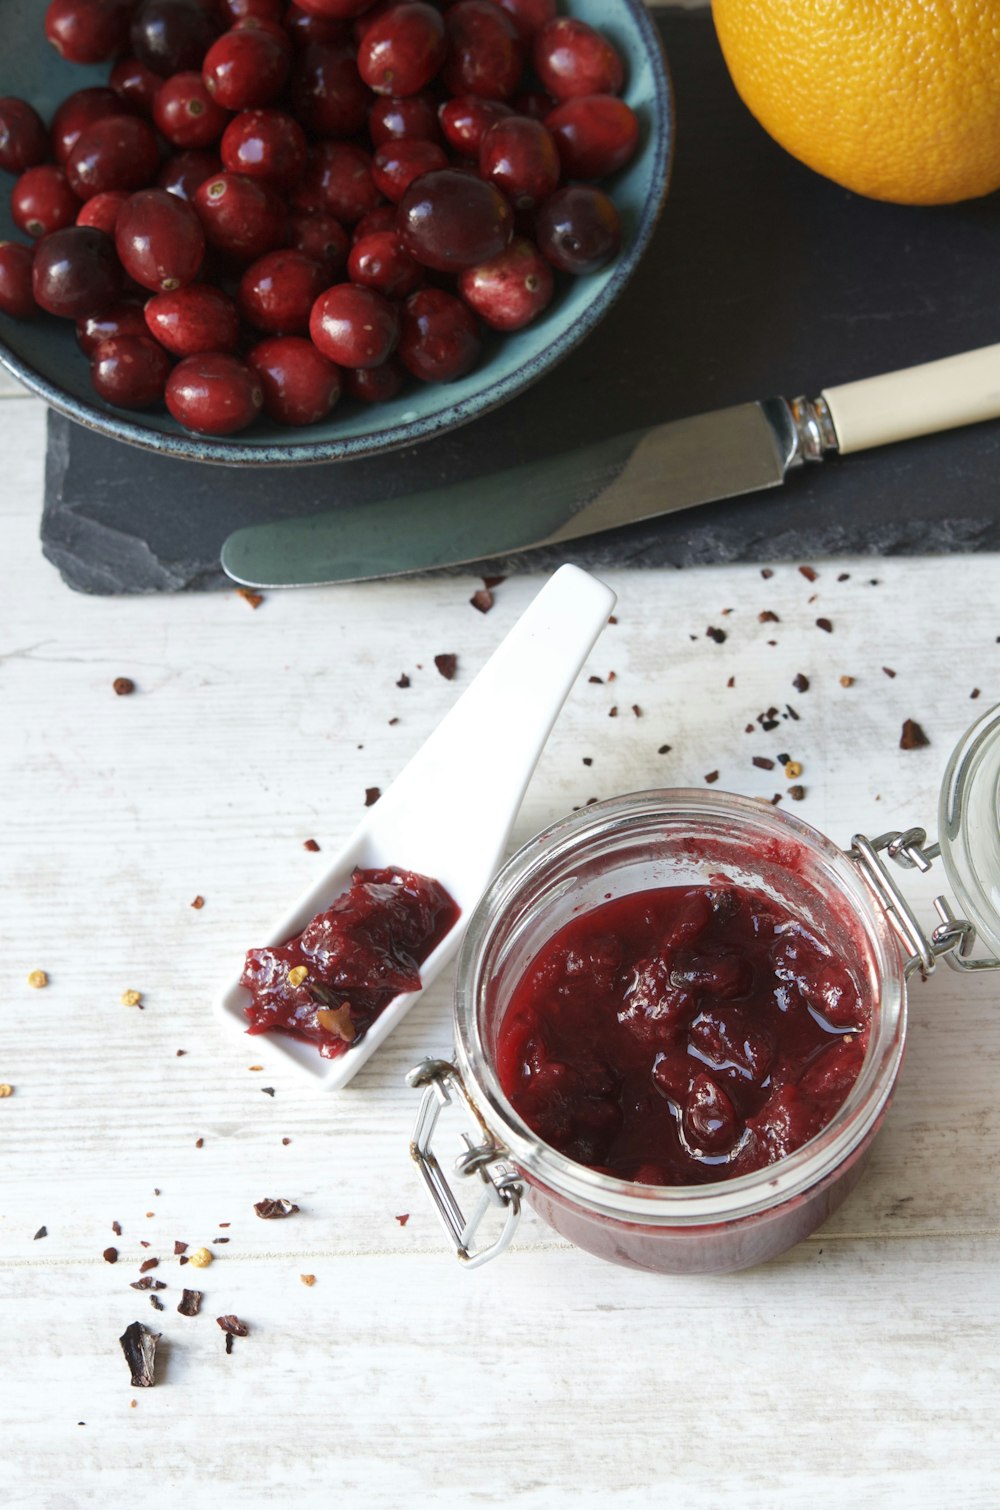 a jar of cranberry sauce next to a bowl of cherries